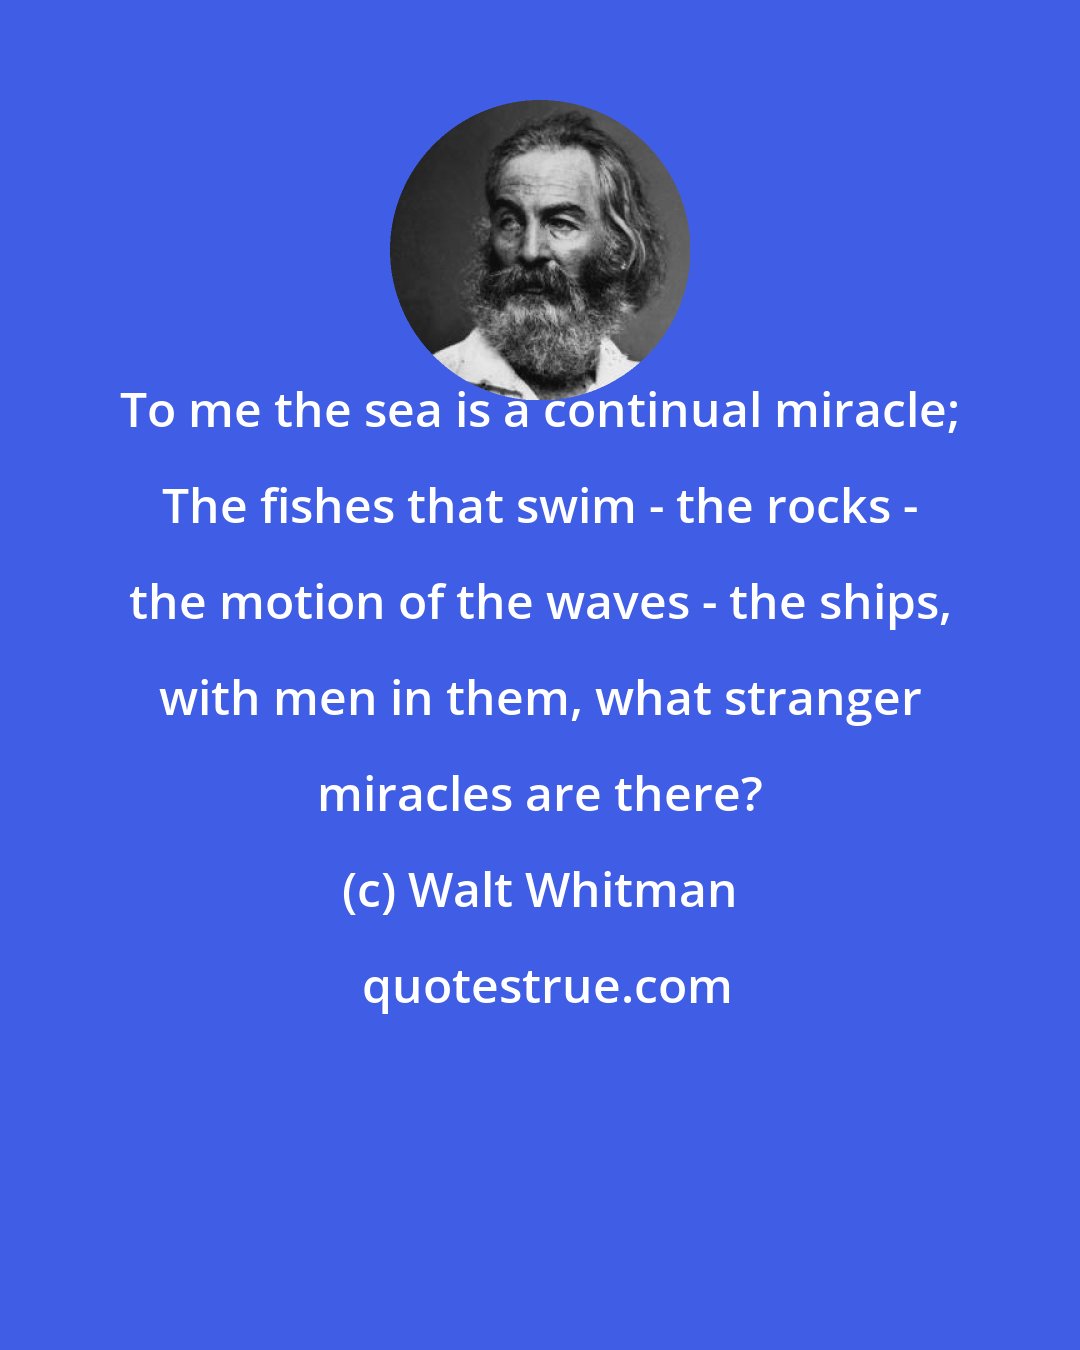 Walt Whitman: To me the sea is a continual miracle; The fishes that swim - the rocks - the motion of the waves - the ships, with men in them, what stranger miracles are there?